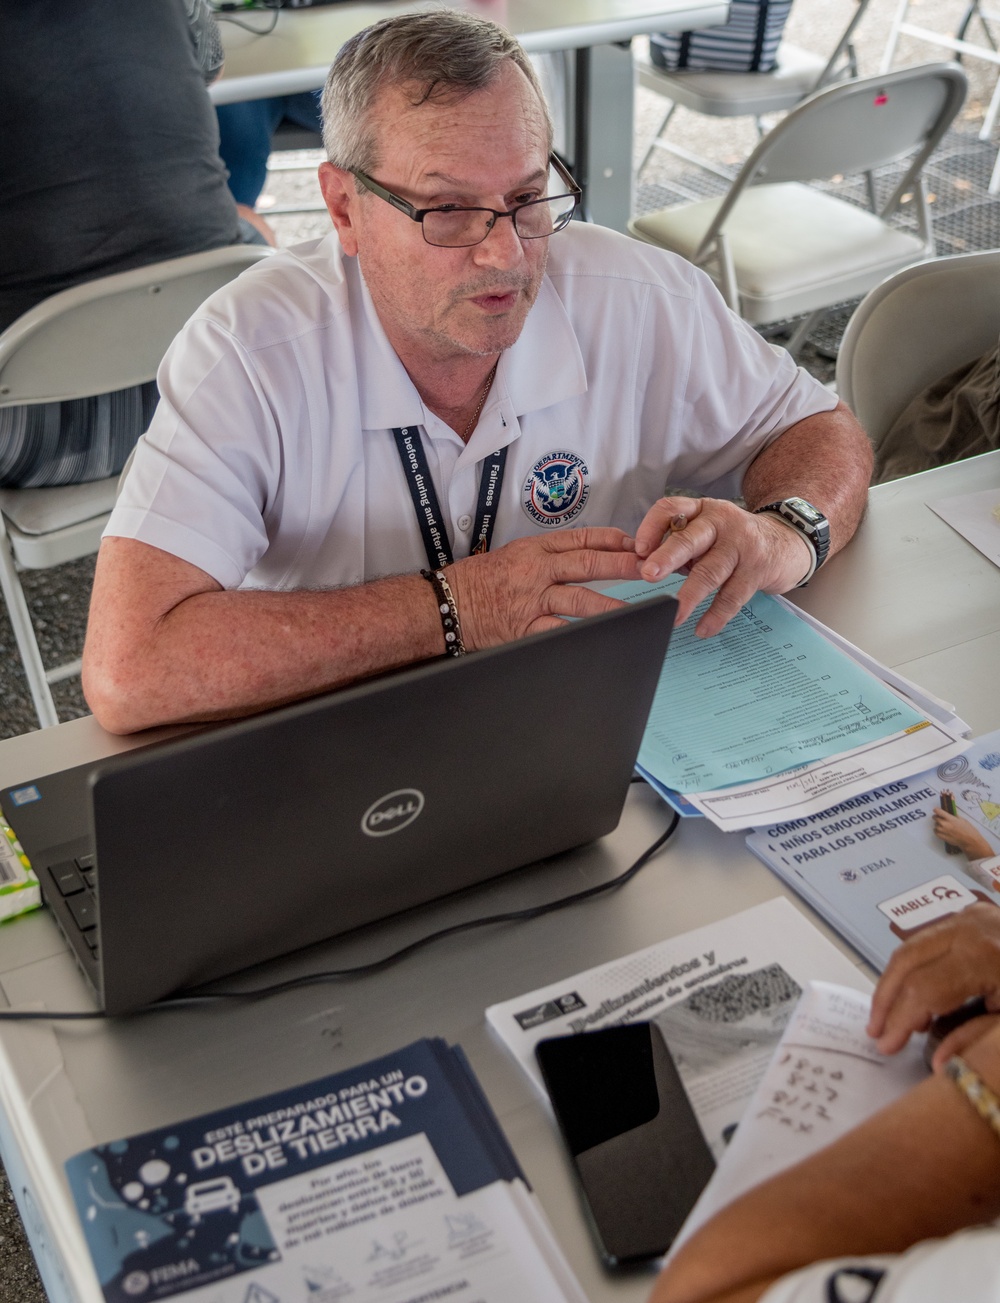 FEMA Disaster Assistance Available for Earthquake Survivors at Recovery Centers